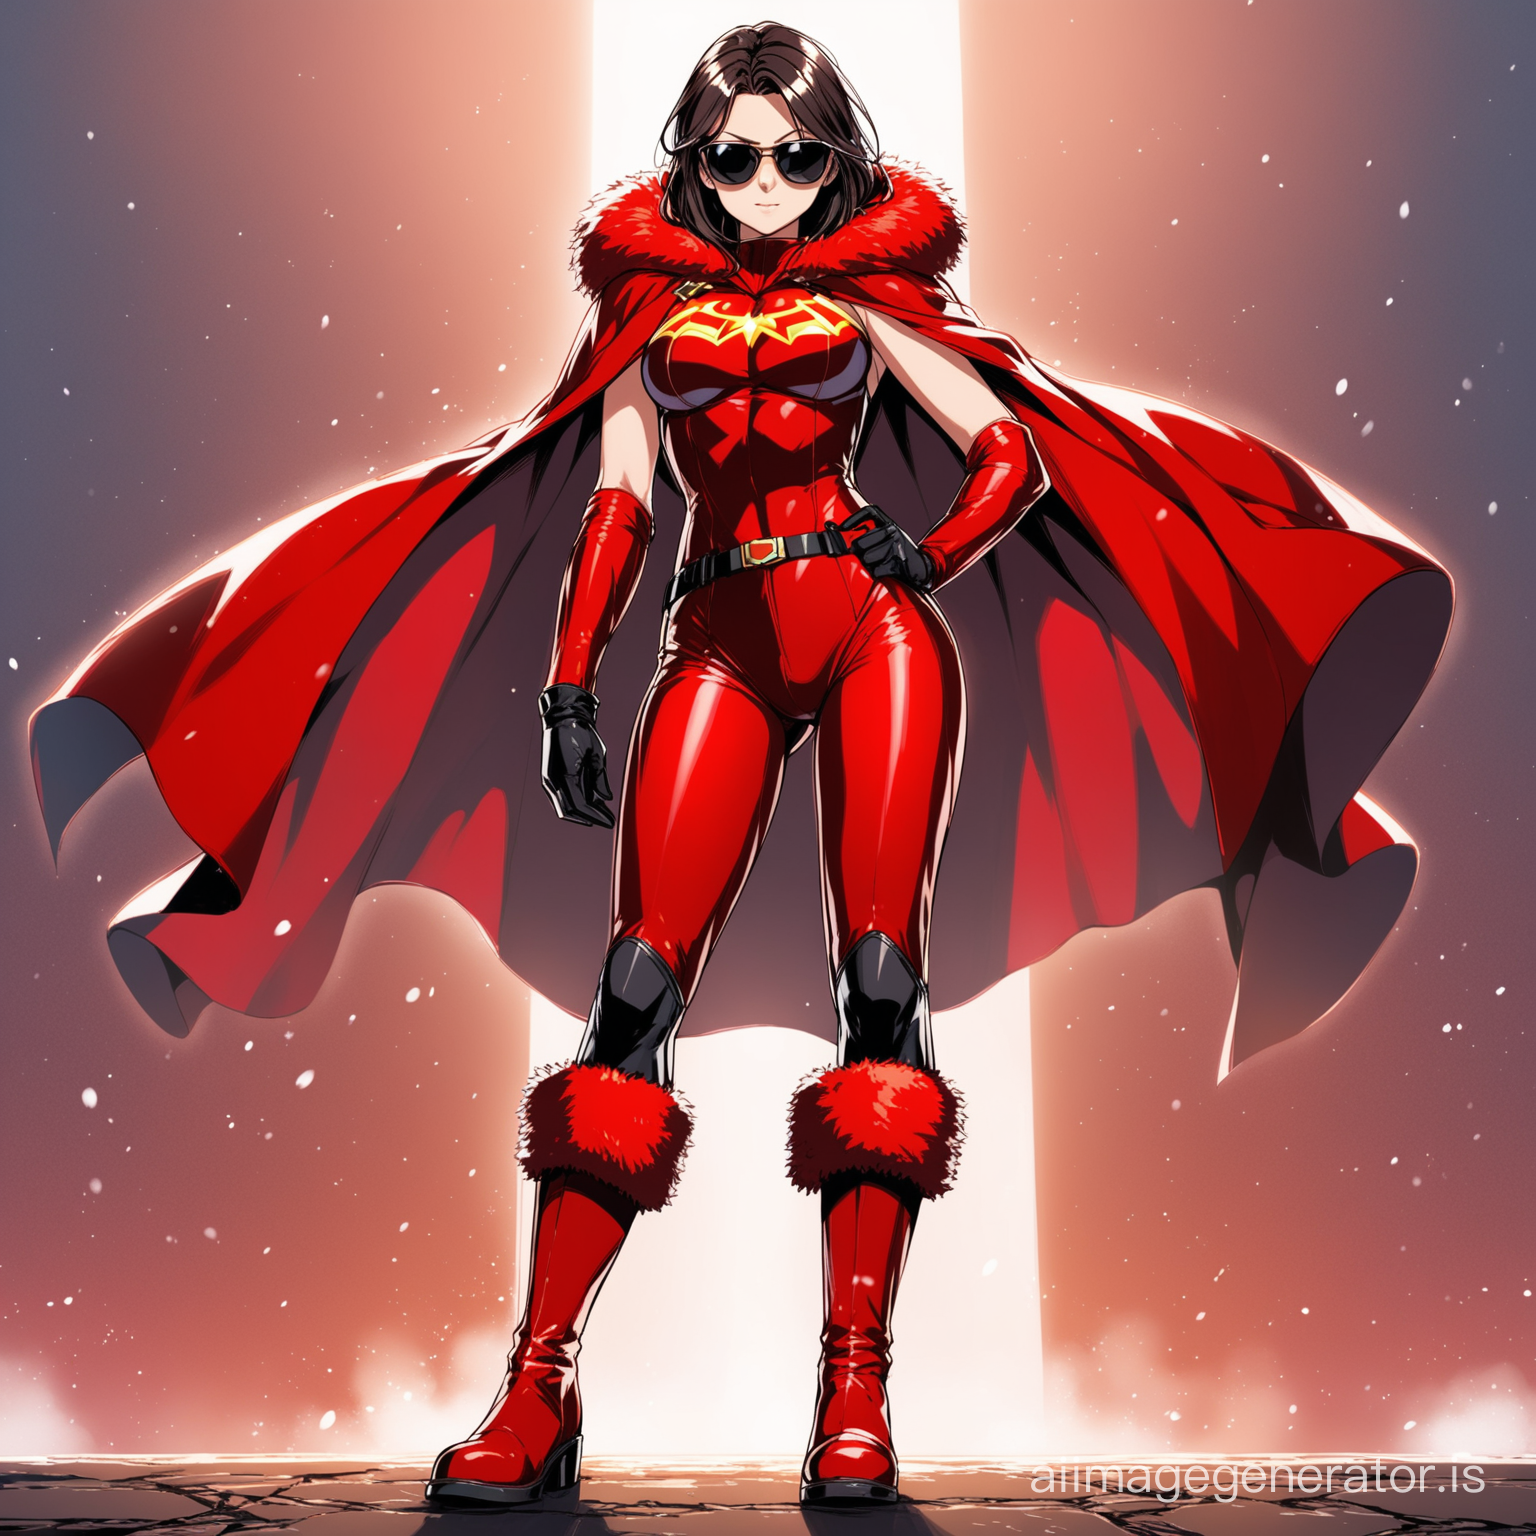 hot anime girl in a red superhero costume wearing a cape holded by fur on her shoulder region and a pair of leather boots, gloves and a pair of cool shades